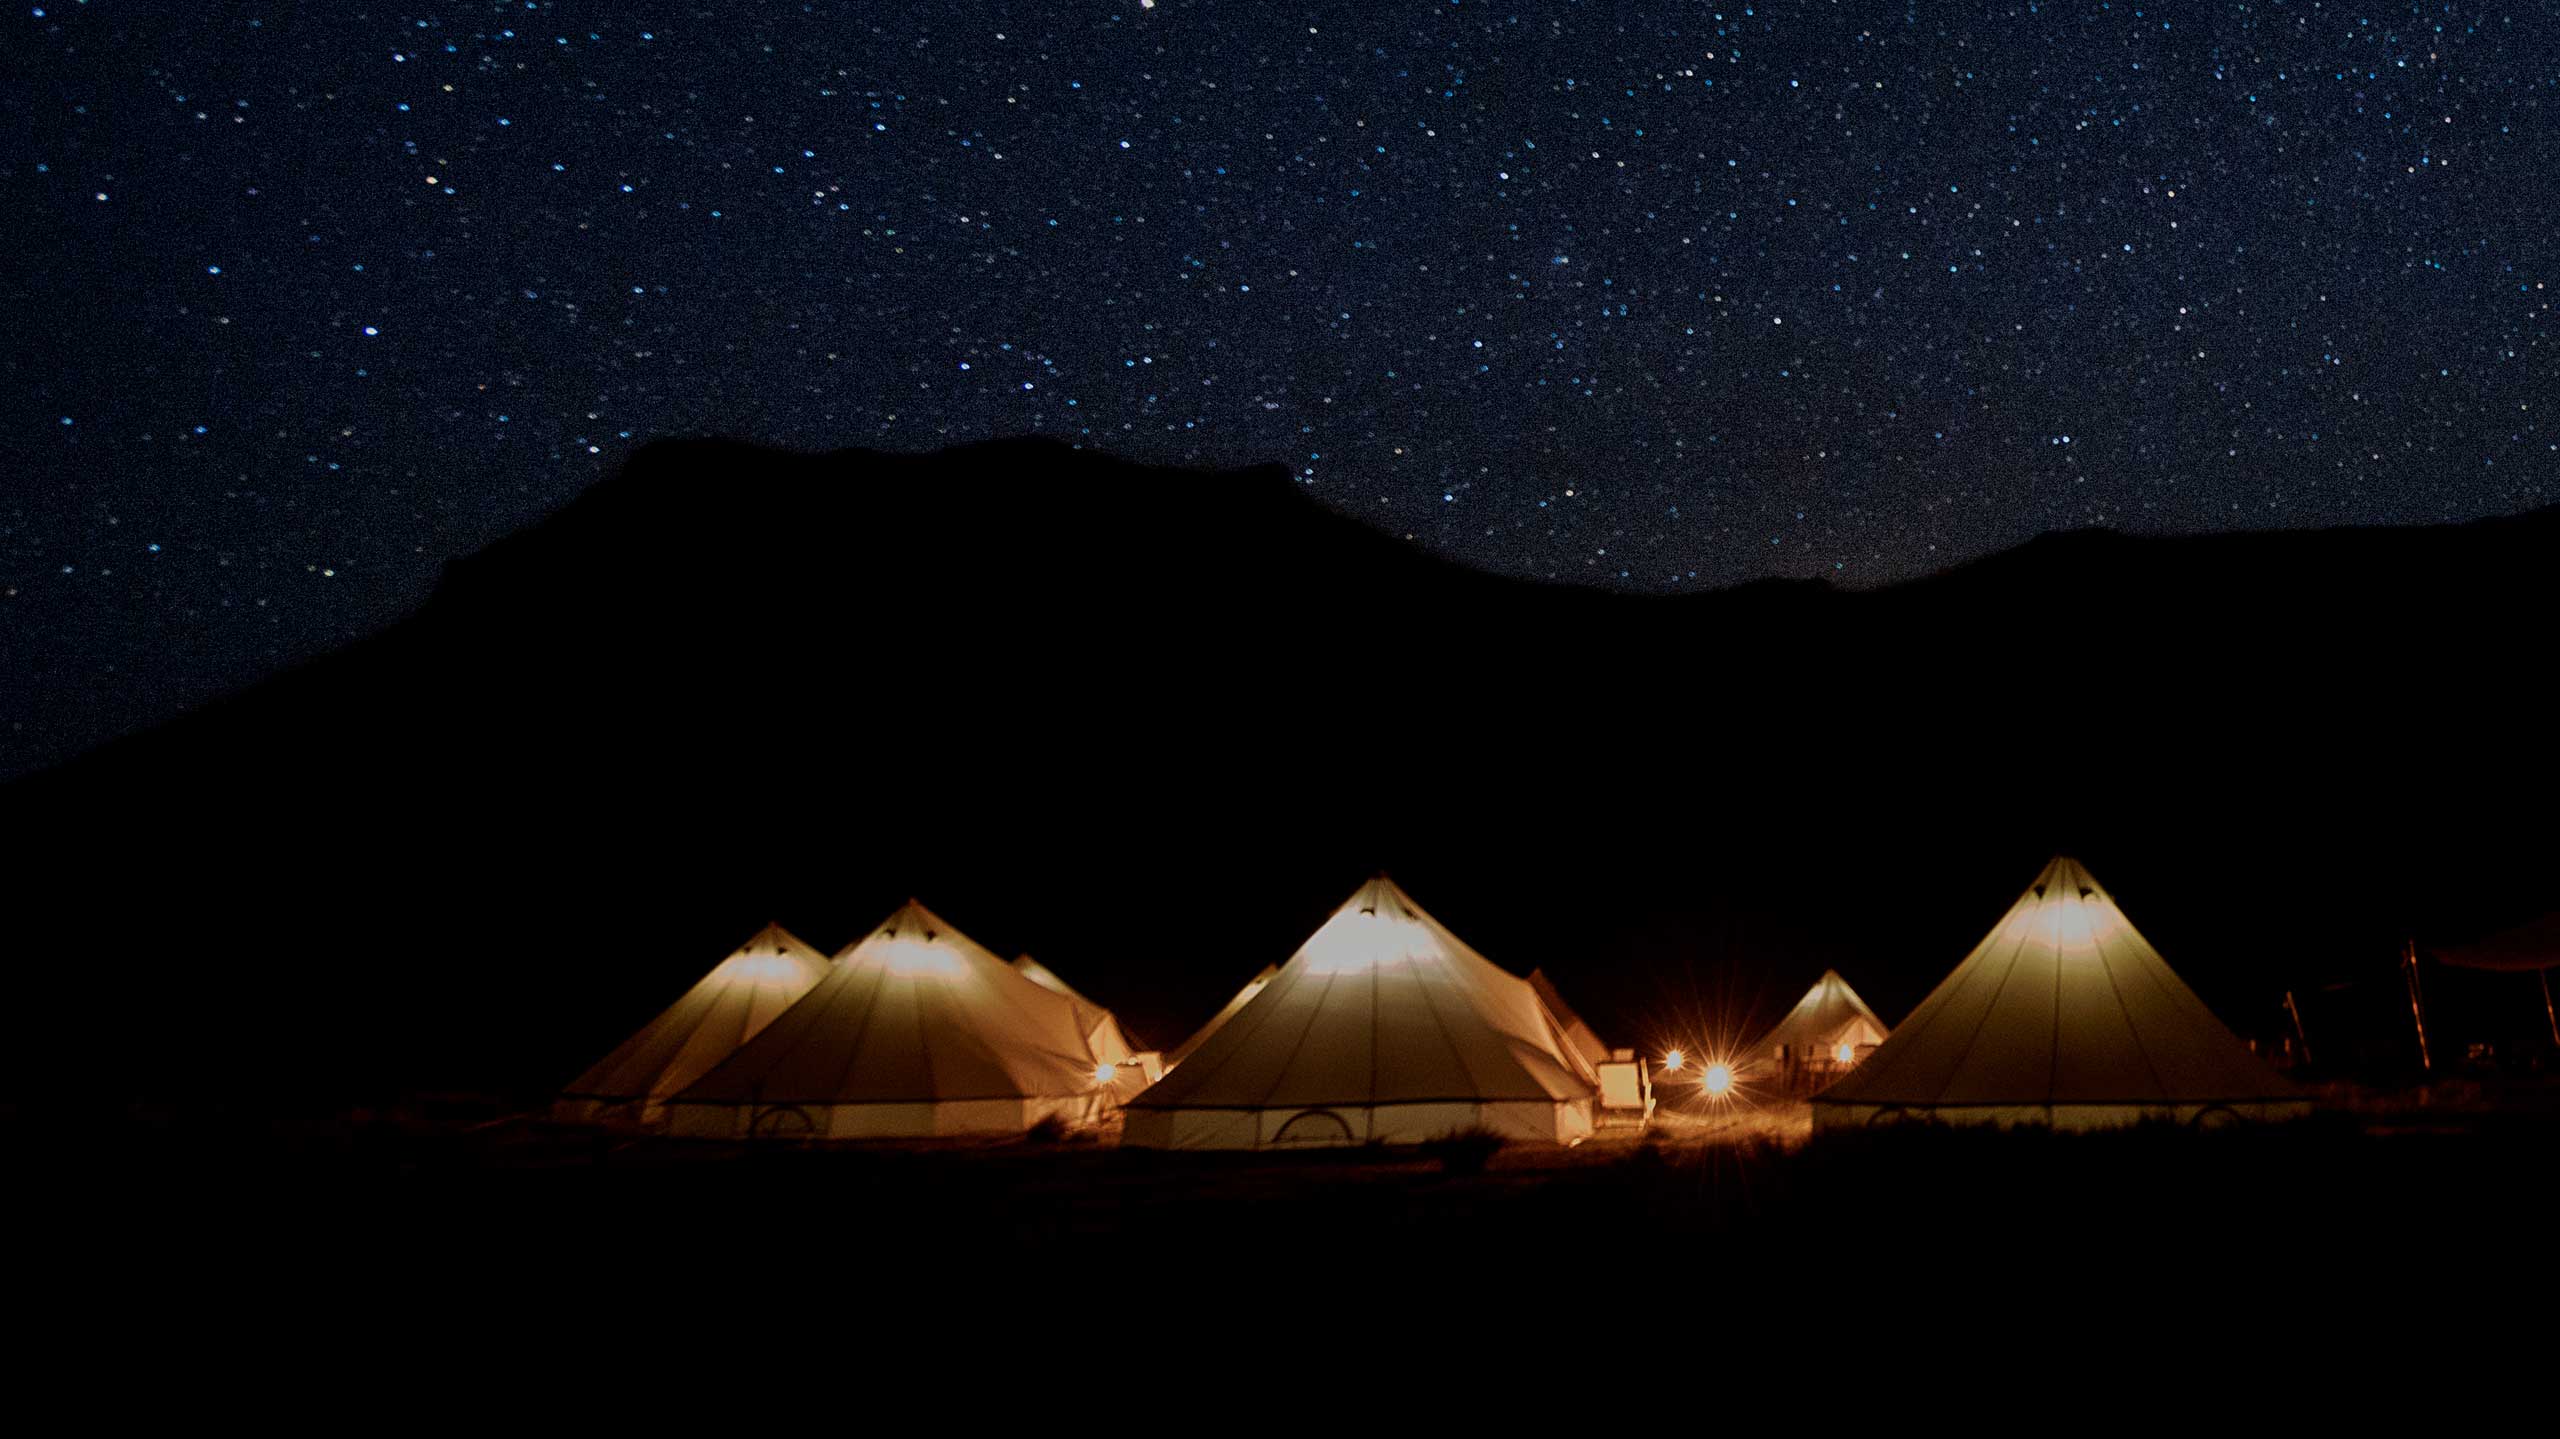 Nomadic glamping in bell tents in Argentina